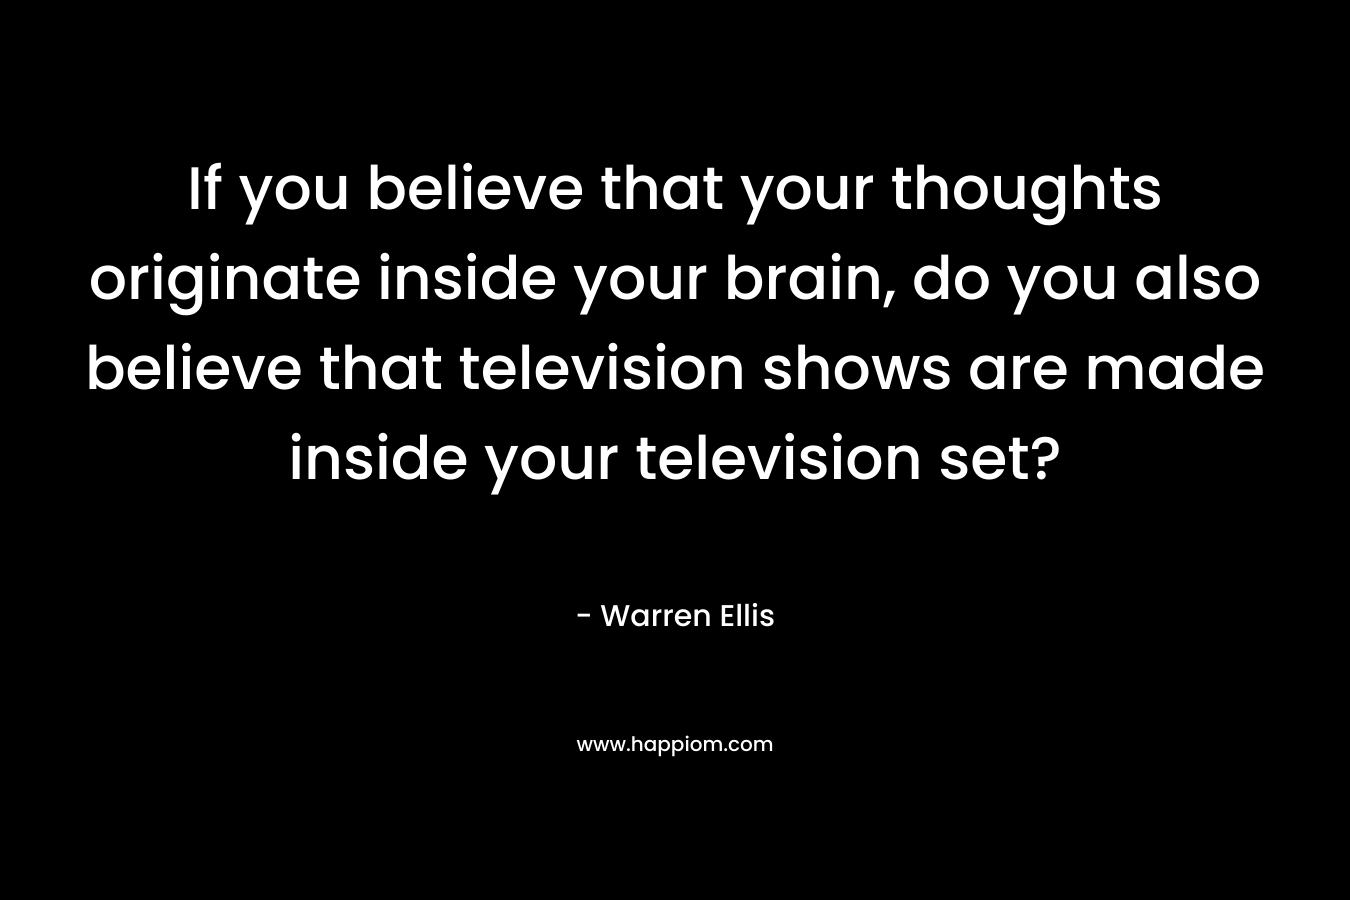 If you believe that your thoughts originate inside your brain, do you also believe that television shows are made inside your television set? – Warren Ellis